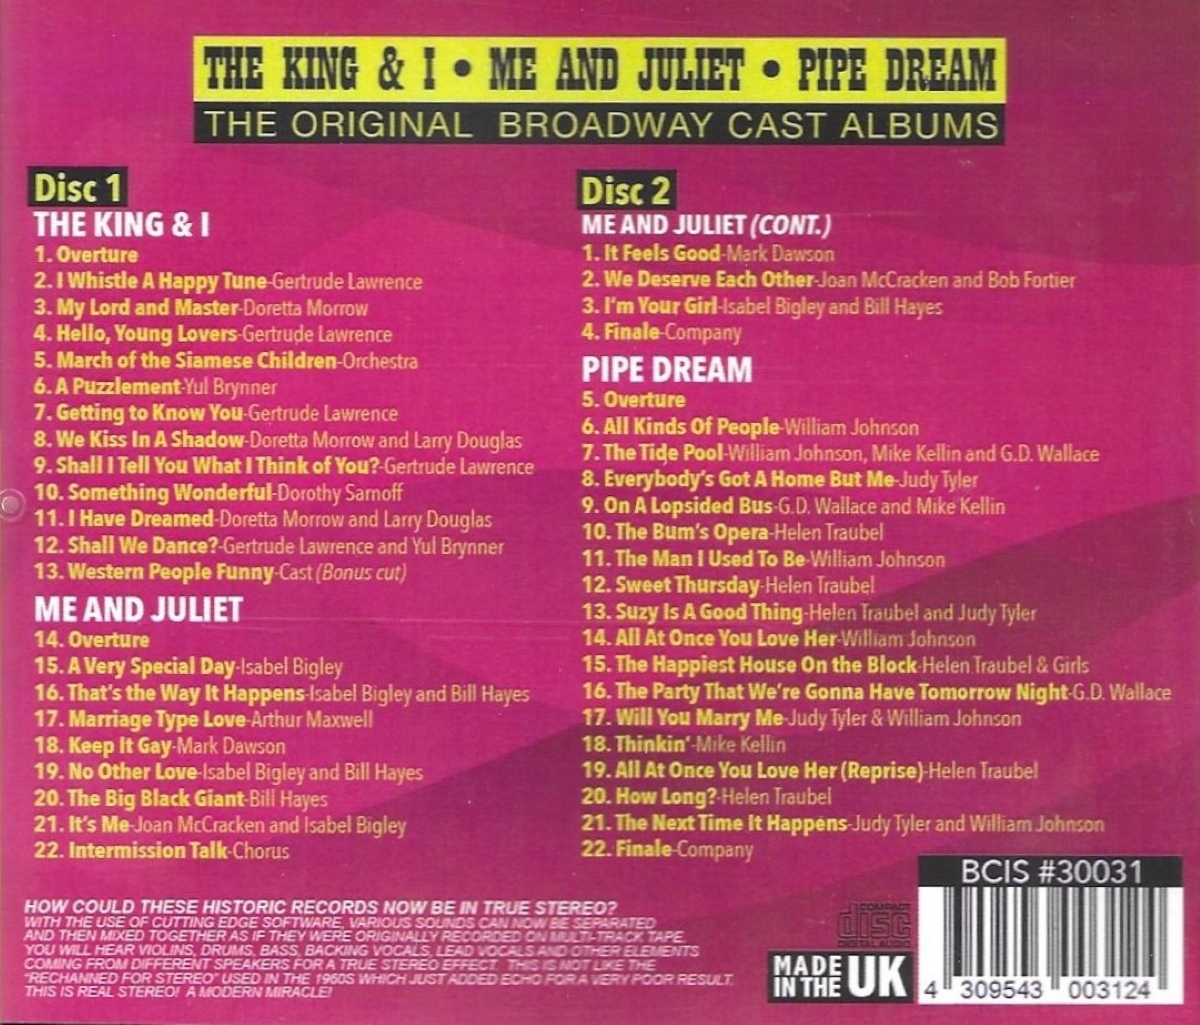 The Original Broadway Cast Albums - King & I, Me And Juliet & Pipe Dream